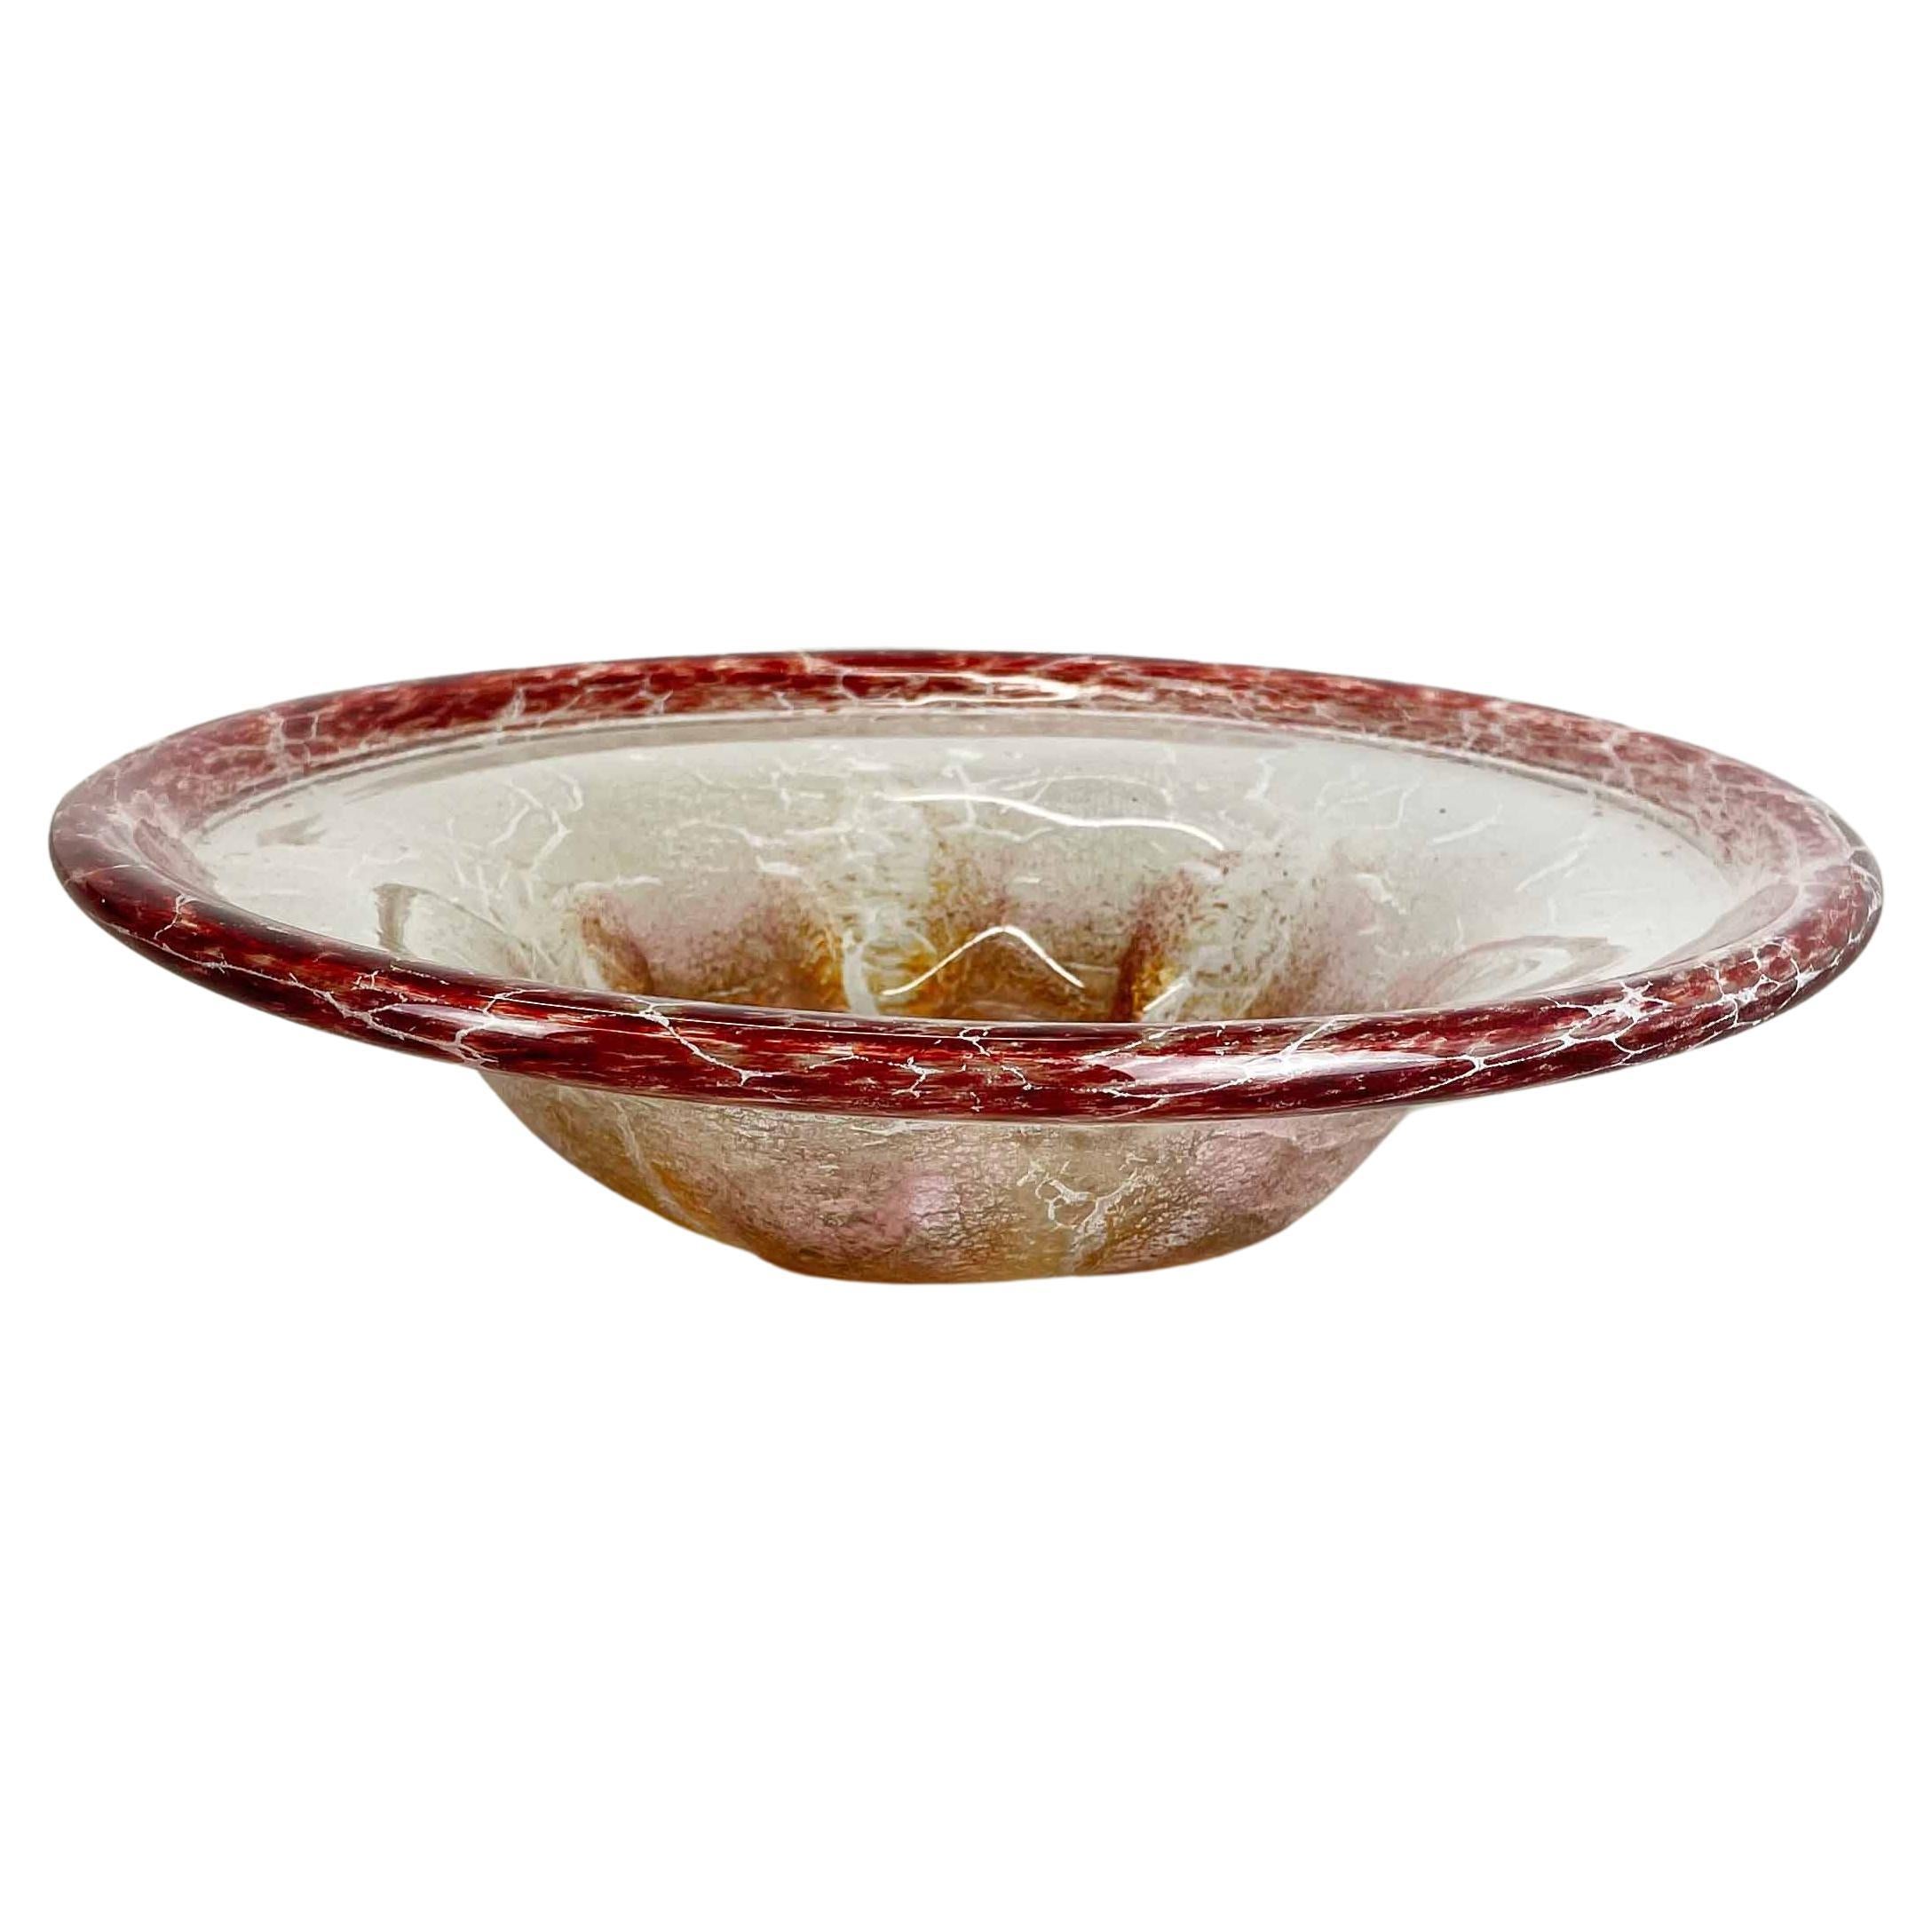 German Red Glass Bowl by Karl Wiedmann for WMF Ikora, 1930s Baushaus Art Deco For Sale